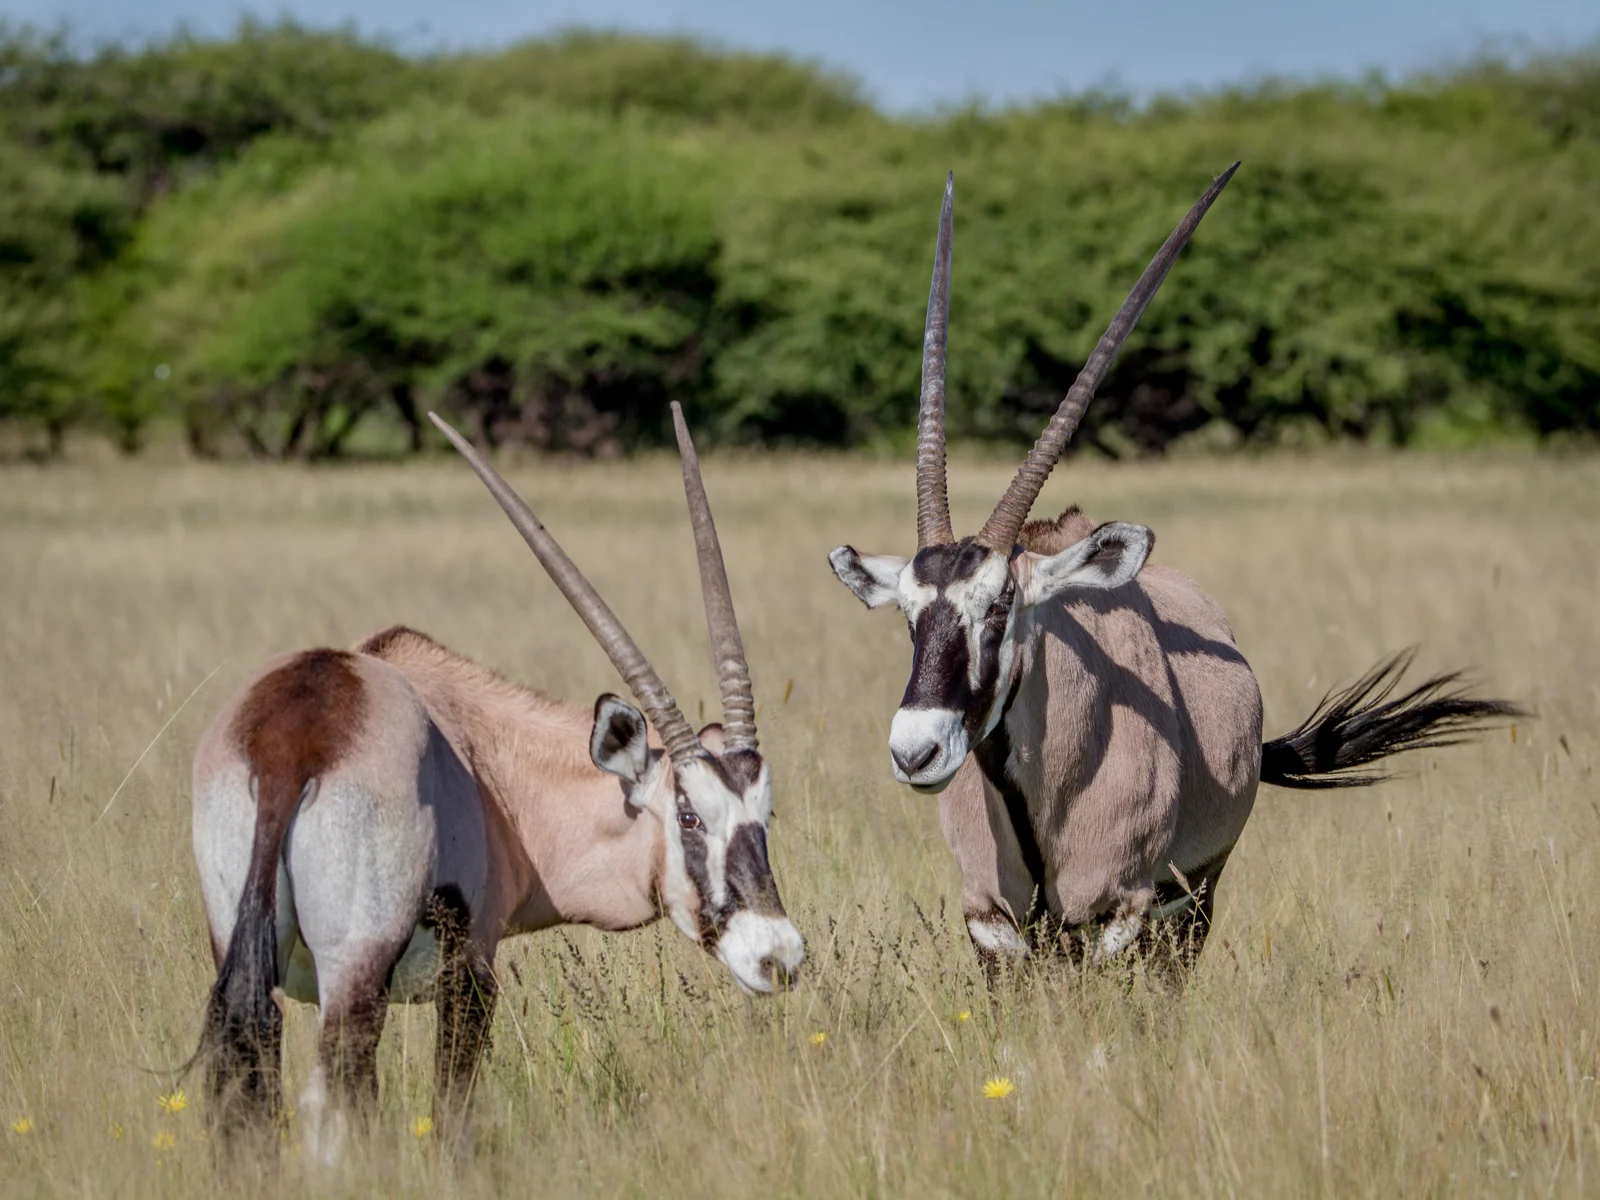 Two gemsbock at the Central Kalahari Game Reserve, one of the best safaris in Africa